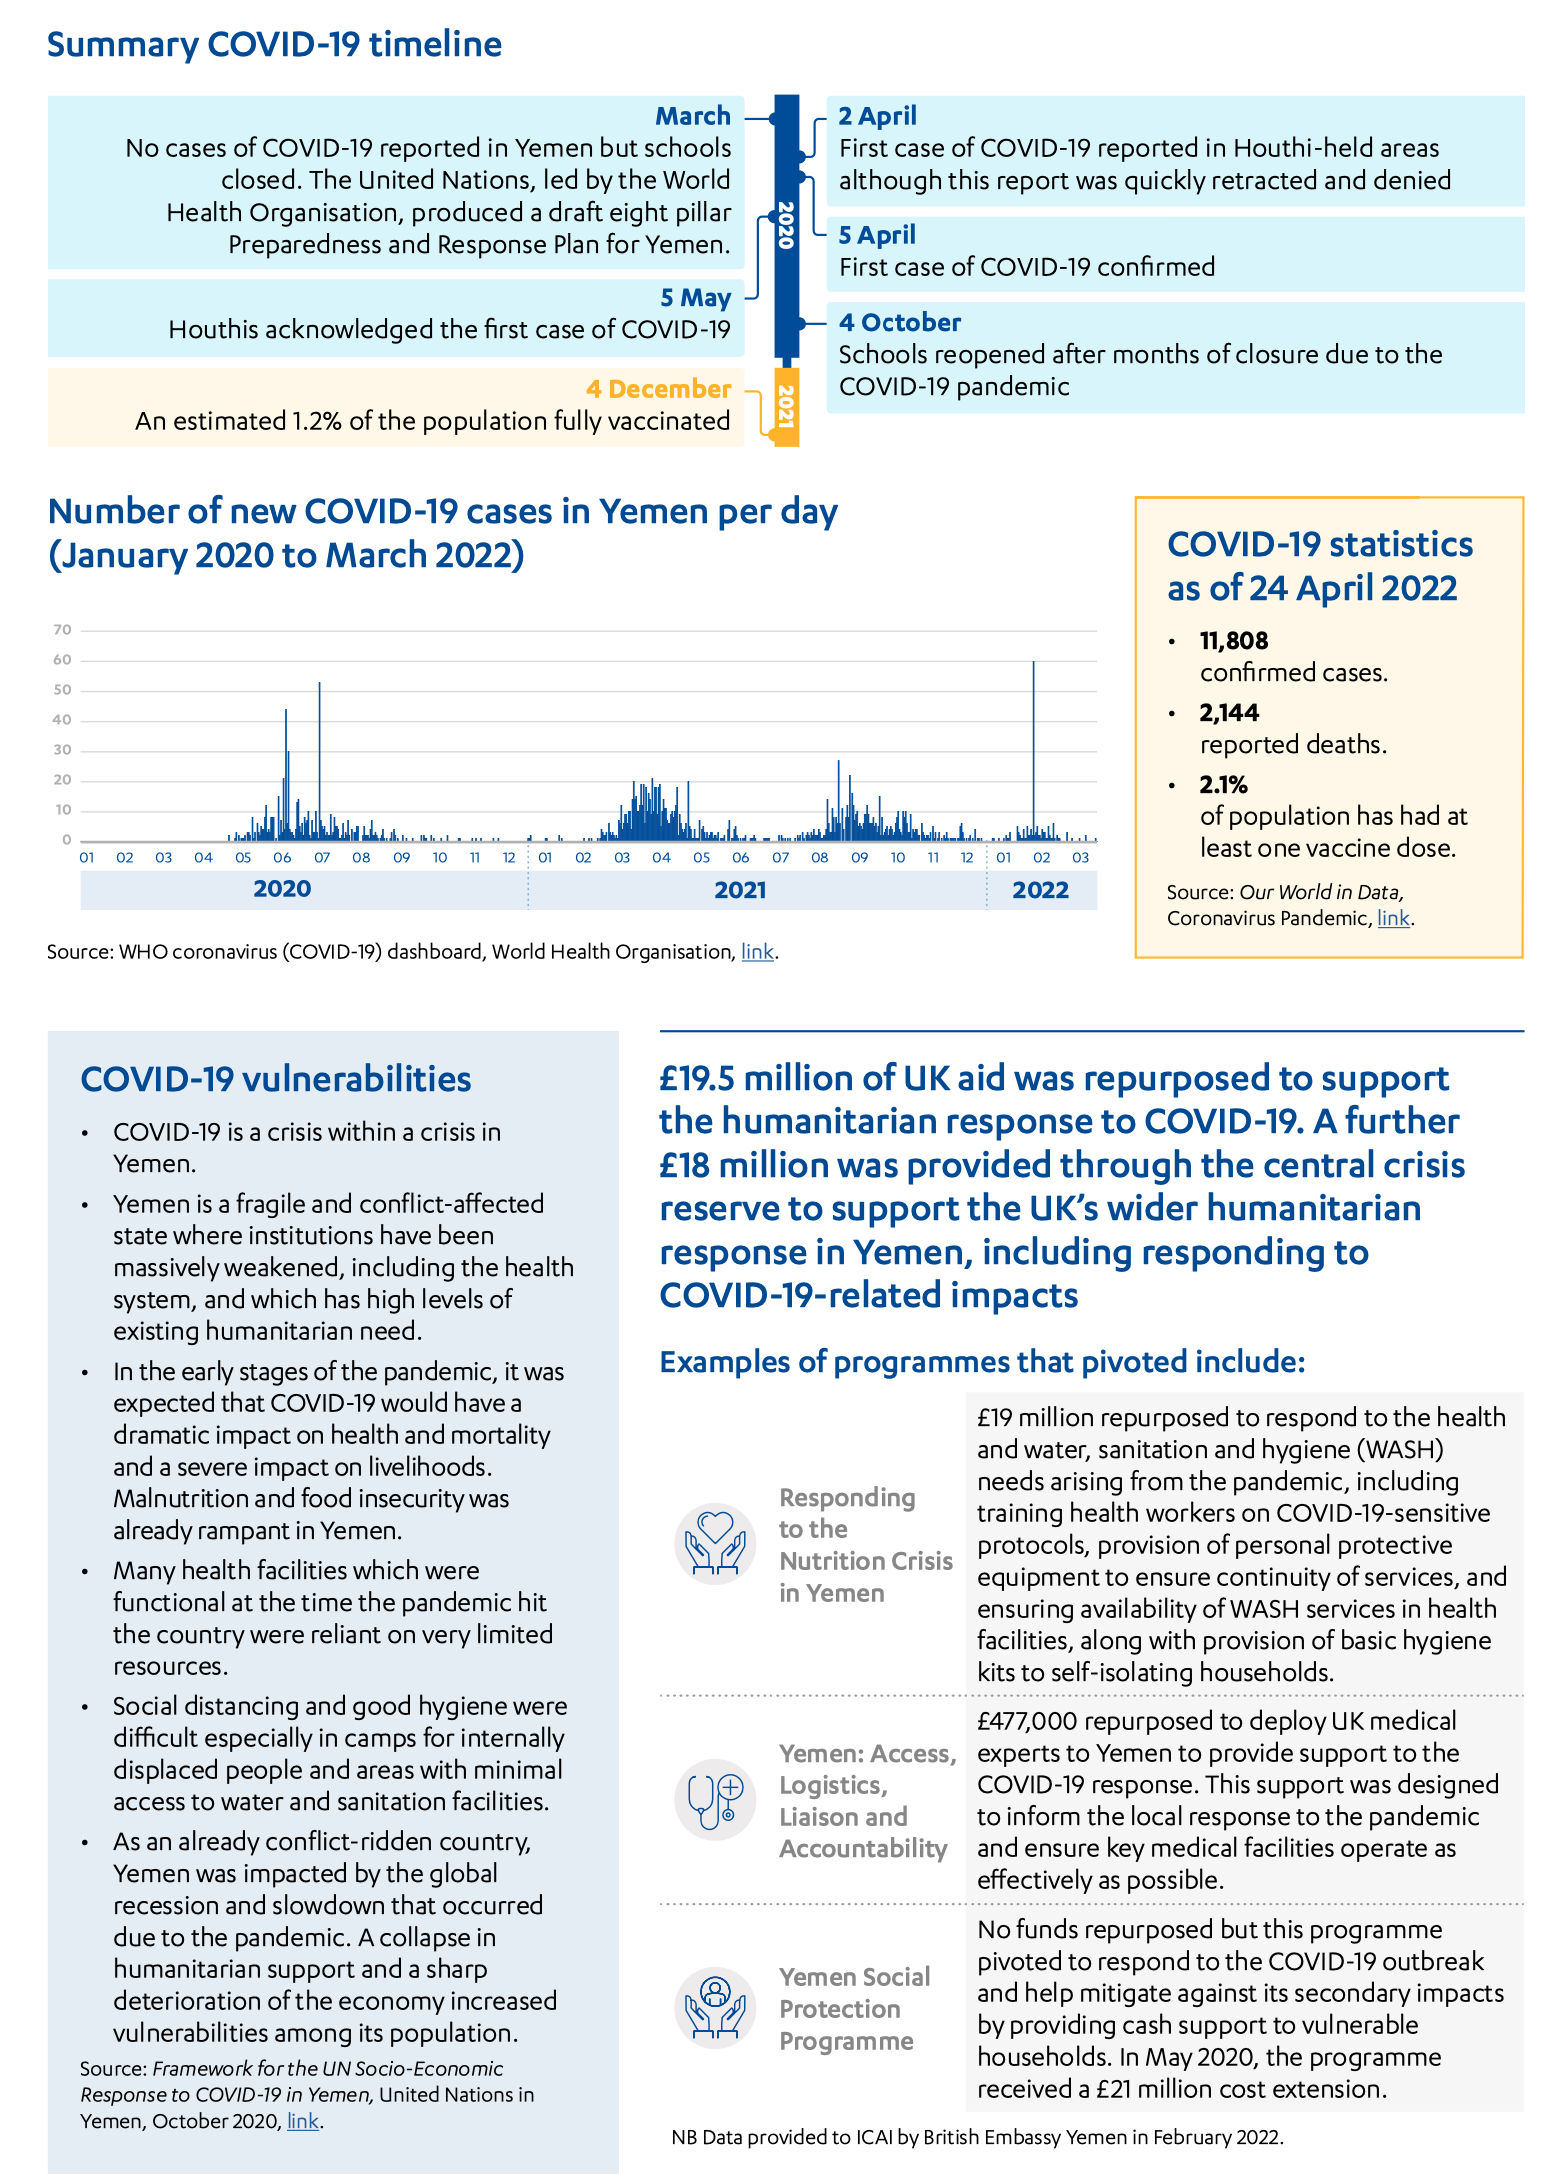 Yemen case study, including Summary COVID-19 timeline, COVID-19 statistics, COVID-19 vulnerabilities and examples of UK aid repurposed to support the humanitarian response to COVID-19